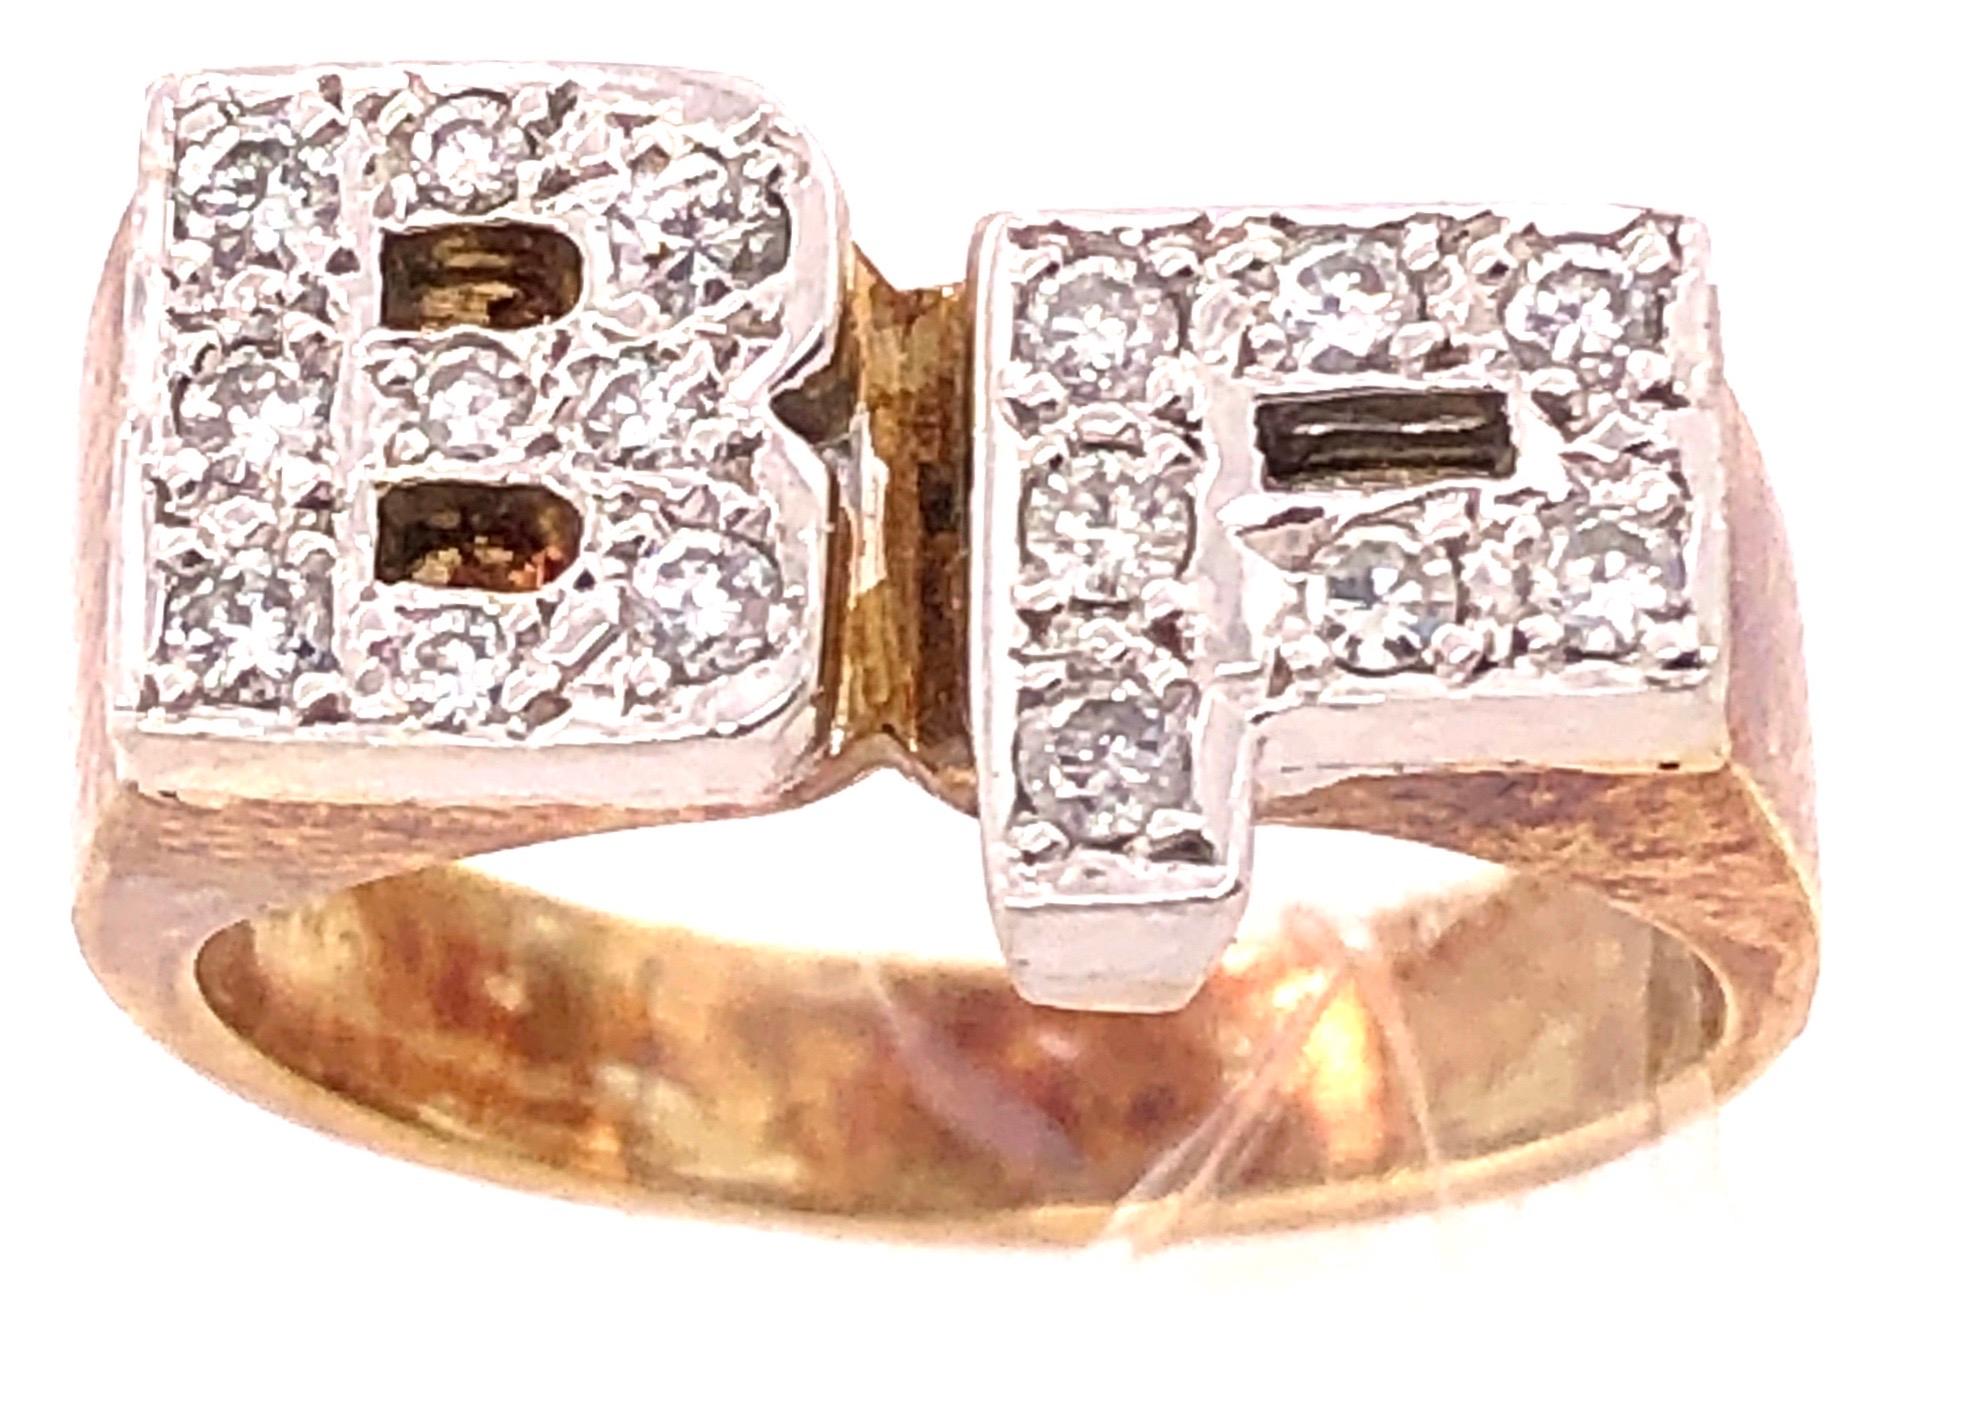 14 Karat White And Yellow Gold and Diamond BP Initial Ring 
Size 4.75
7.5 grams total weight.